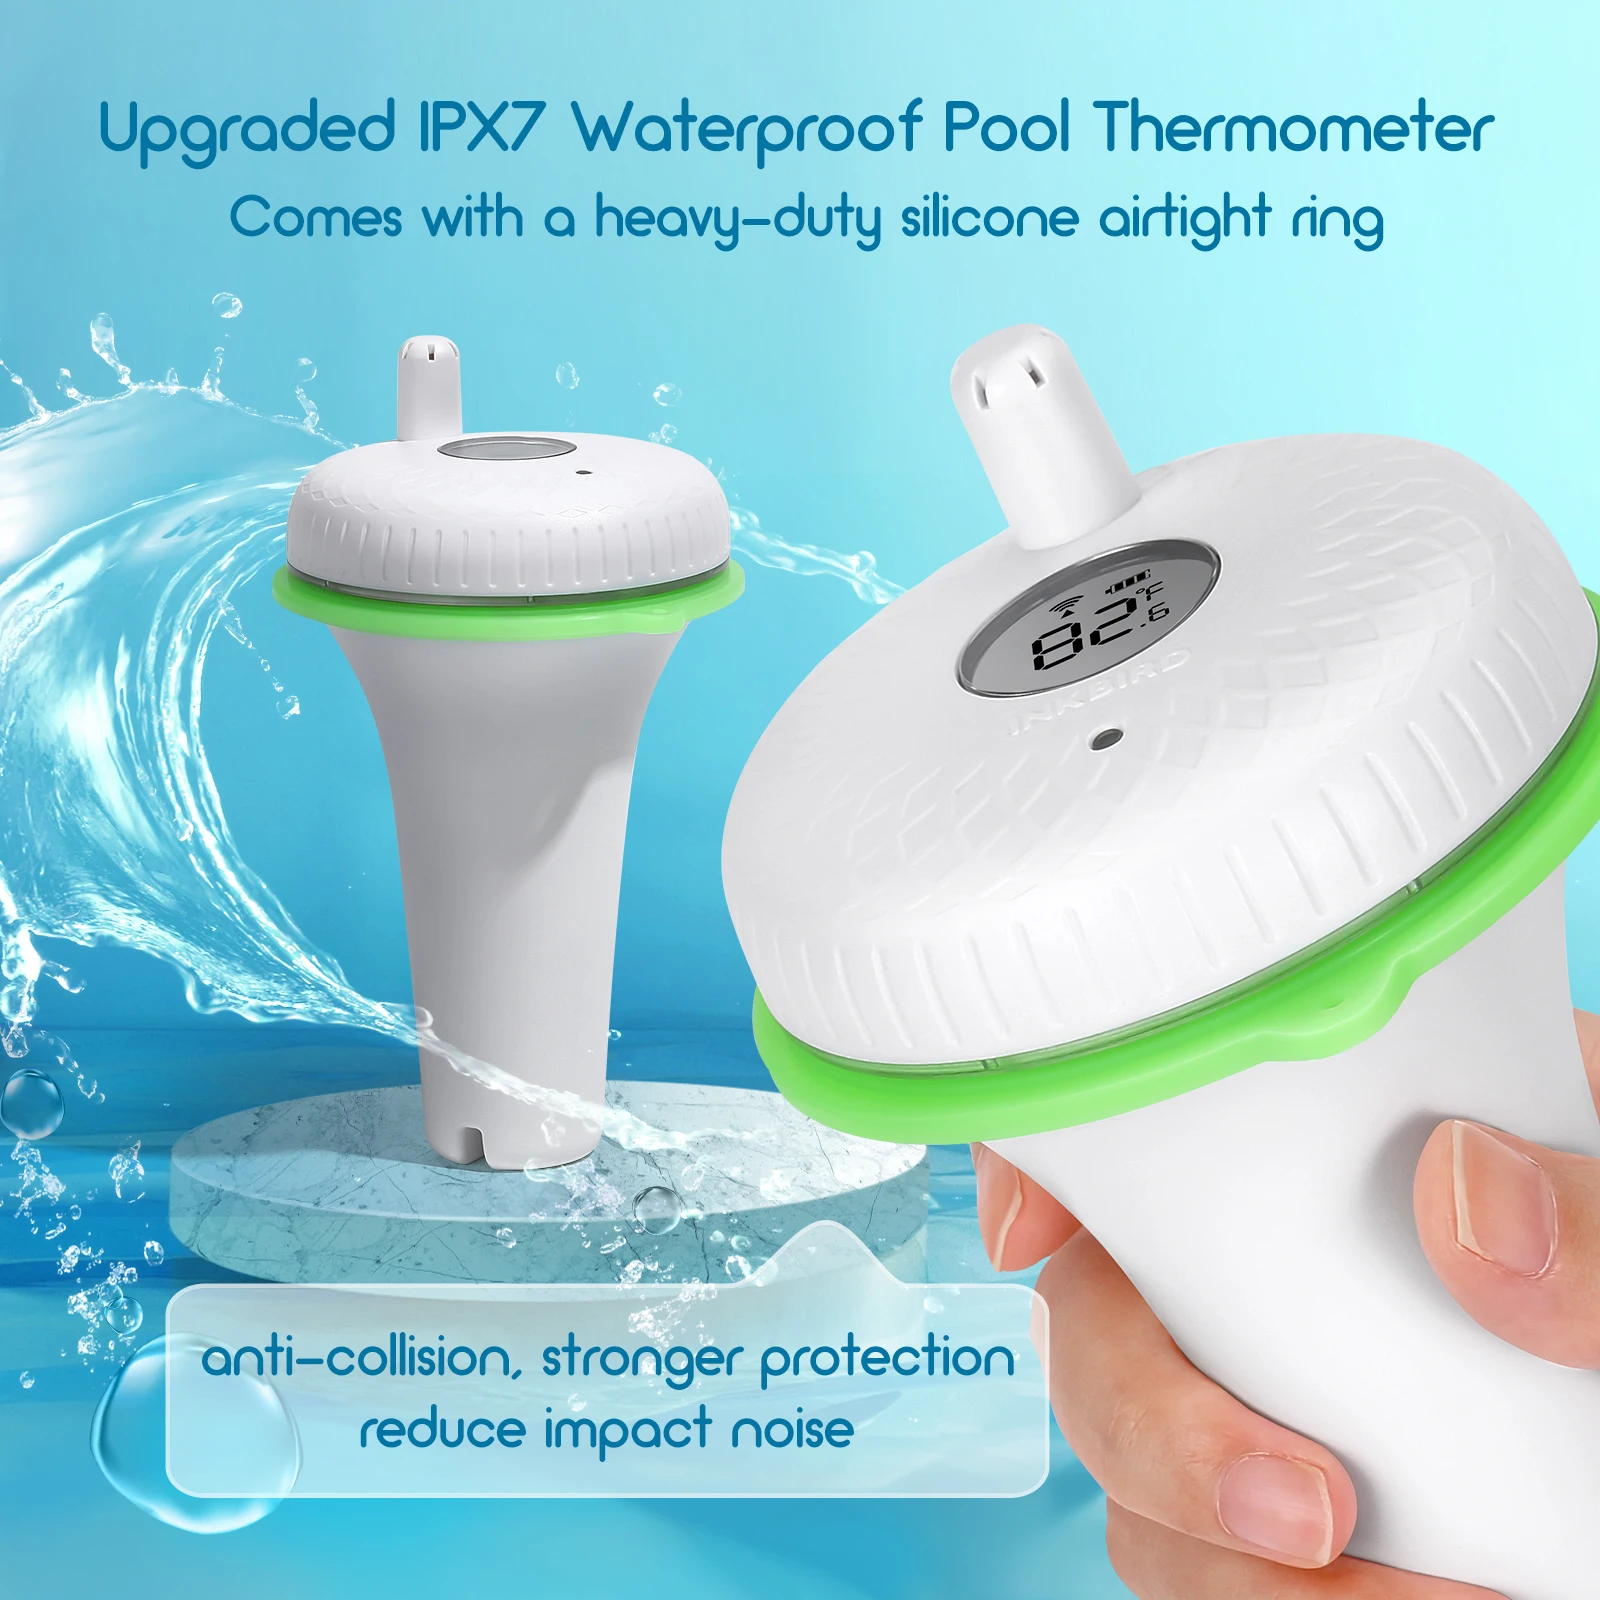 https://ae01.alicdn.com/kf/S7a6ebddd55a94967a158e2e2344706844/INKBIRD-Wireless-Floating-Pool-Thermometer-Waterproof-Temperature-Humidity-Monitor-3-Channels-For-Swimming-Pool-Hot-Tubs.jpg